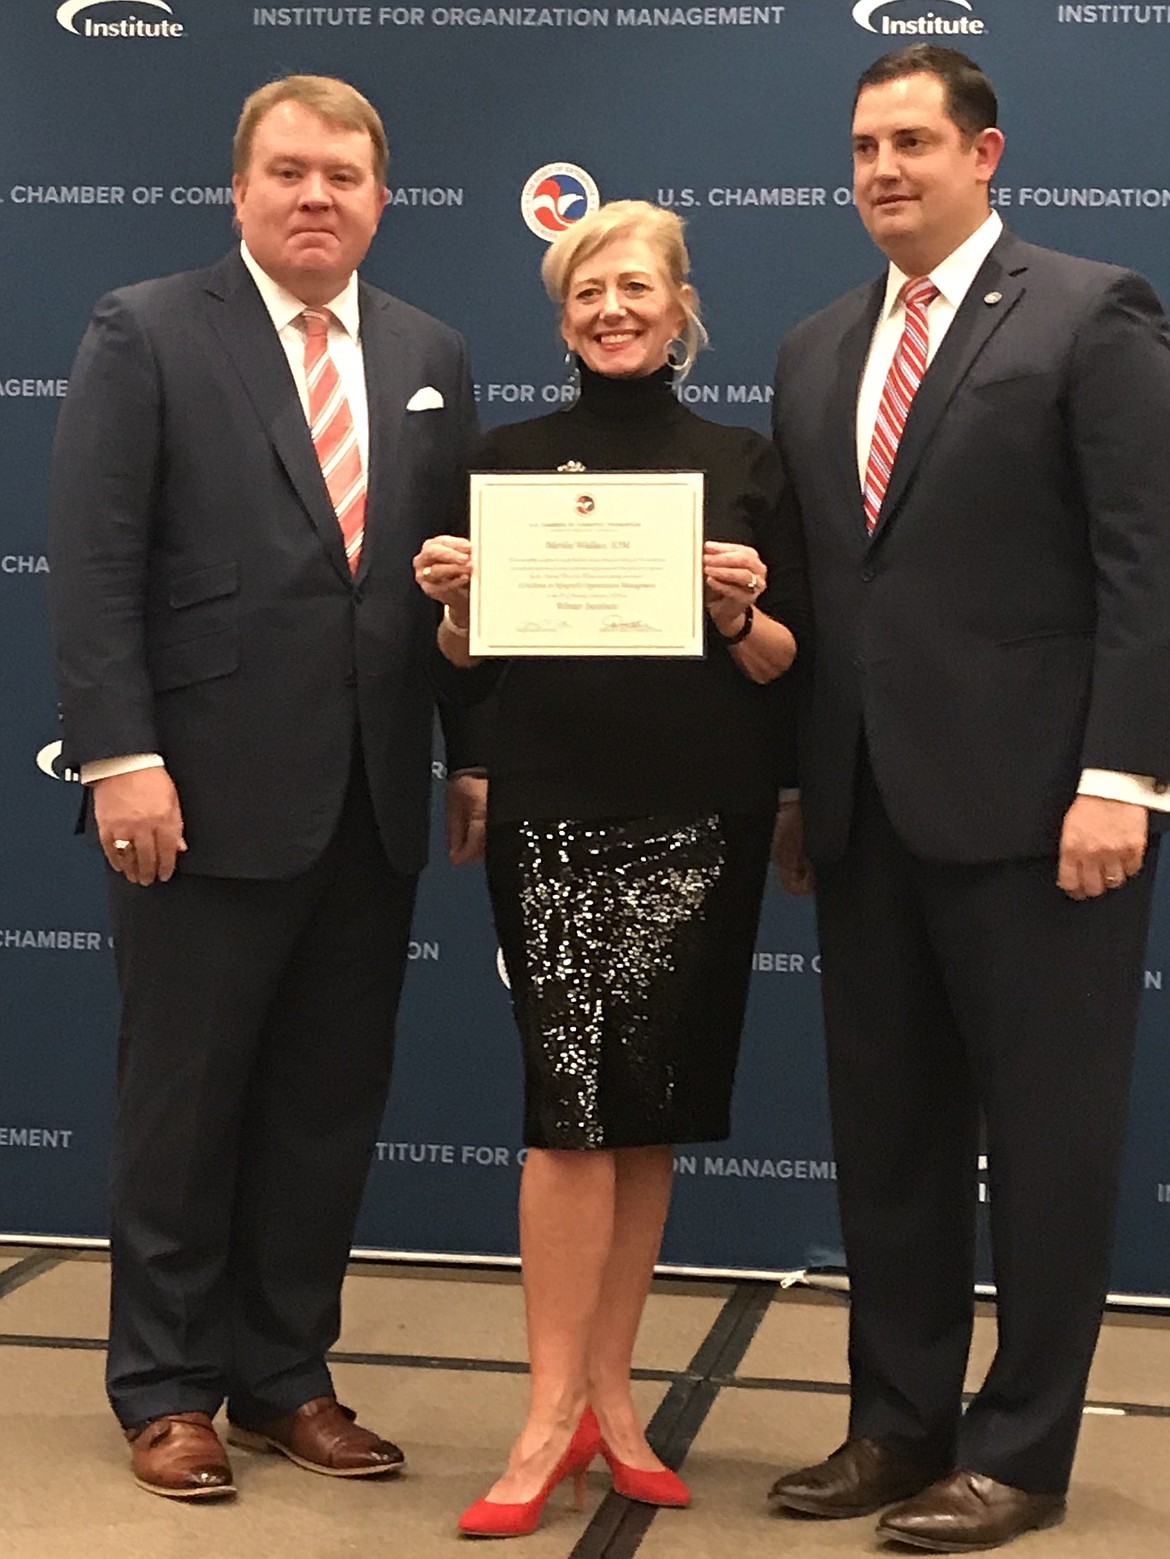 COURTESY PHOTO
Marilee Wallace is flanked by Jeremy Arthur, Chair National Board of Trustees, Institute of&#160;Organization Management, and Thomas Donohue, CEO U.S Chamber of Commerce.